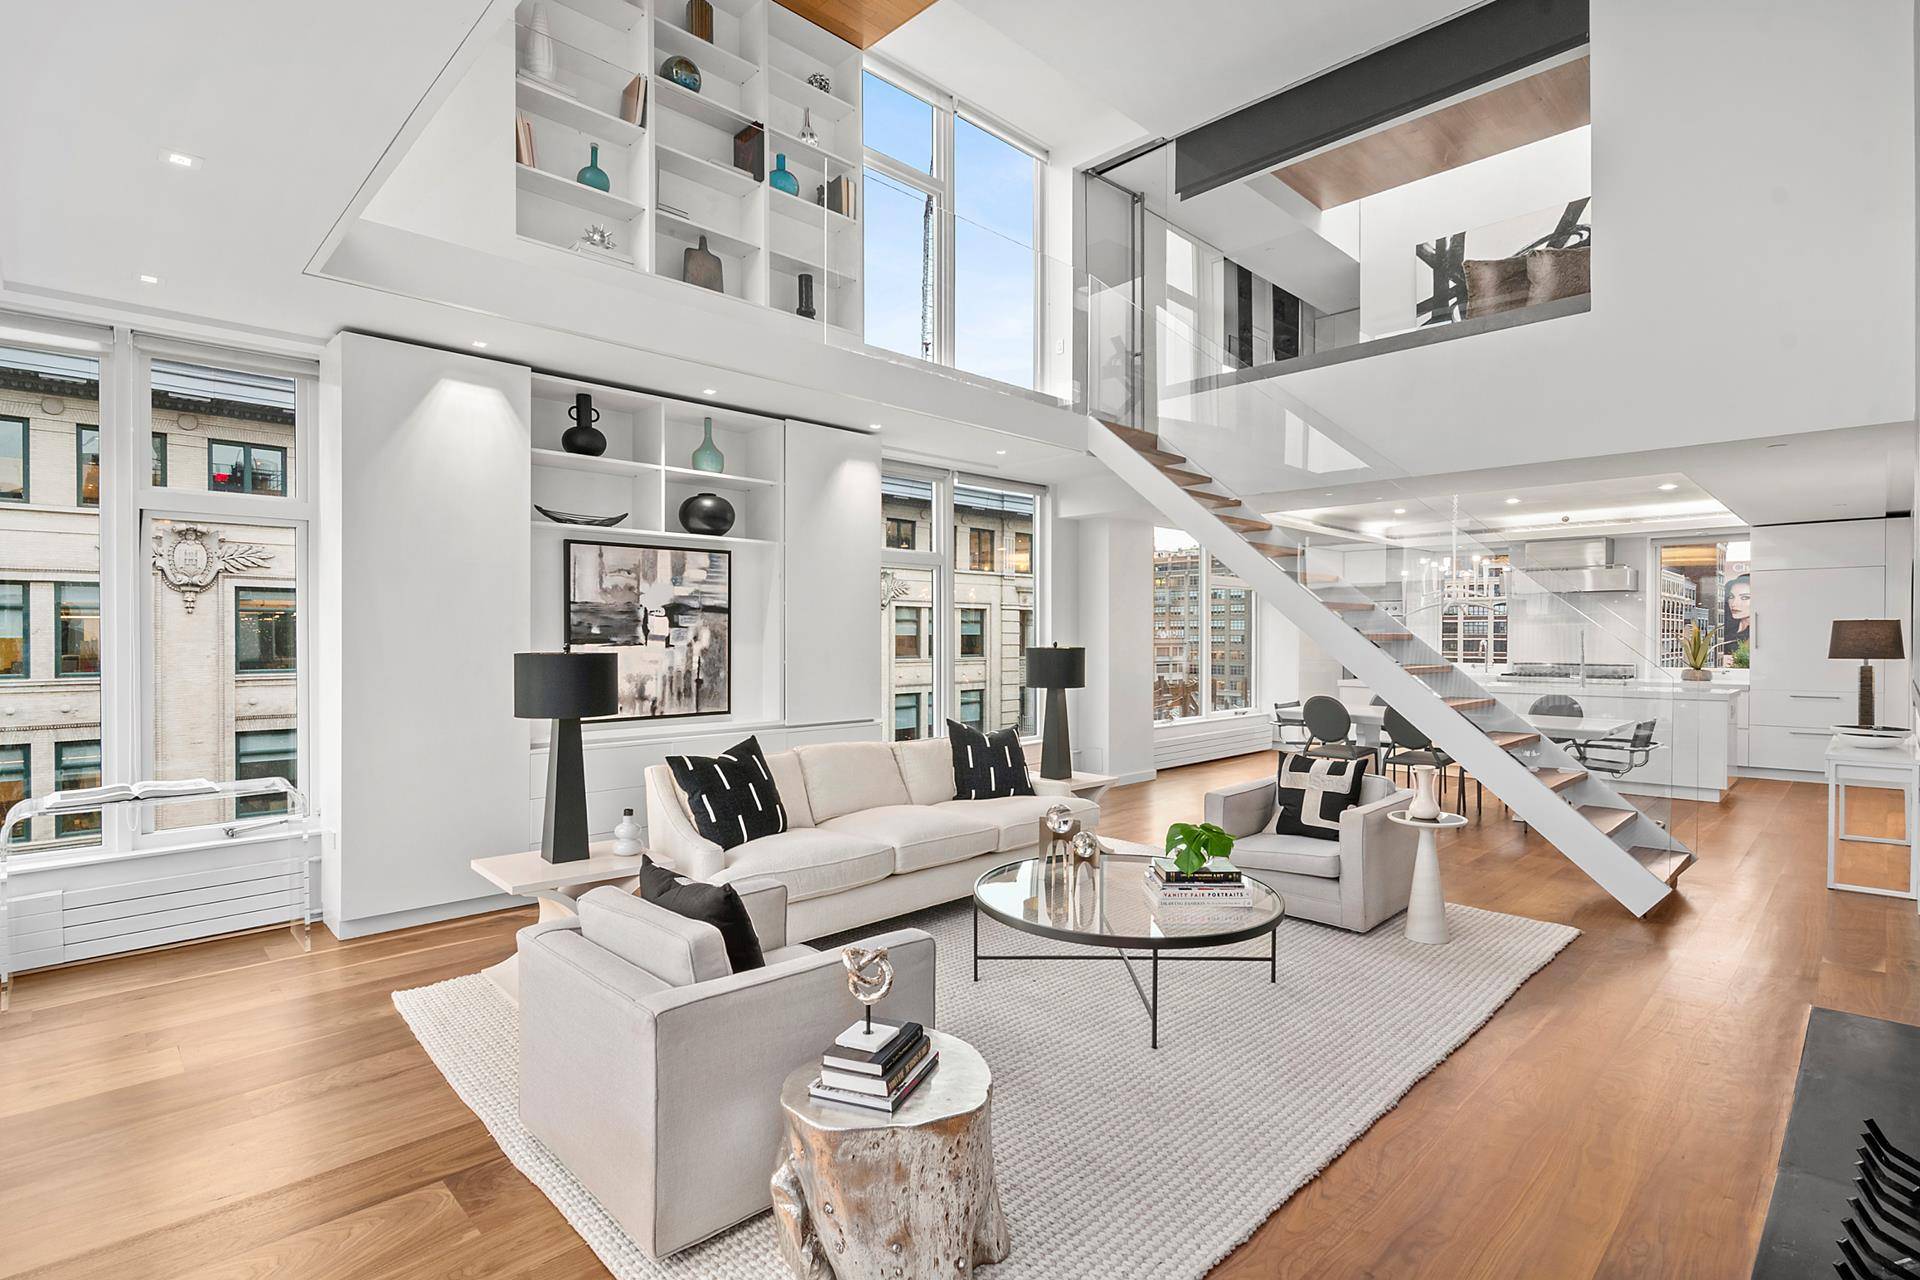 Meticulously crafted by by Staz Zakrzewksi AIA, Z H architects, this is an extraordinary opportunity to own the masterpiece atop 304 Spring Street PH, New York, NY 10013.